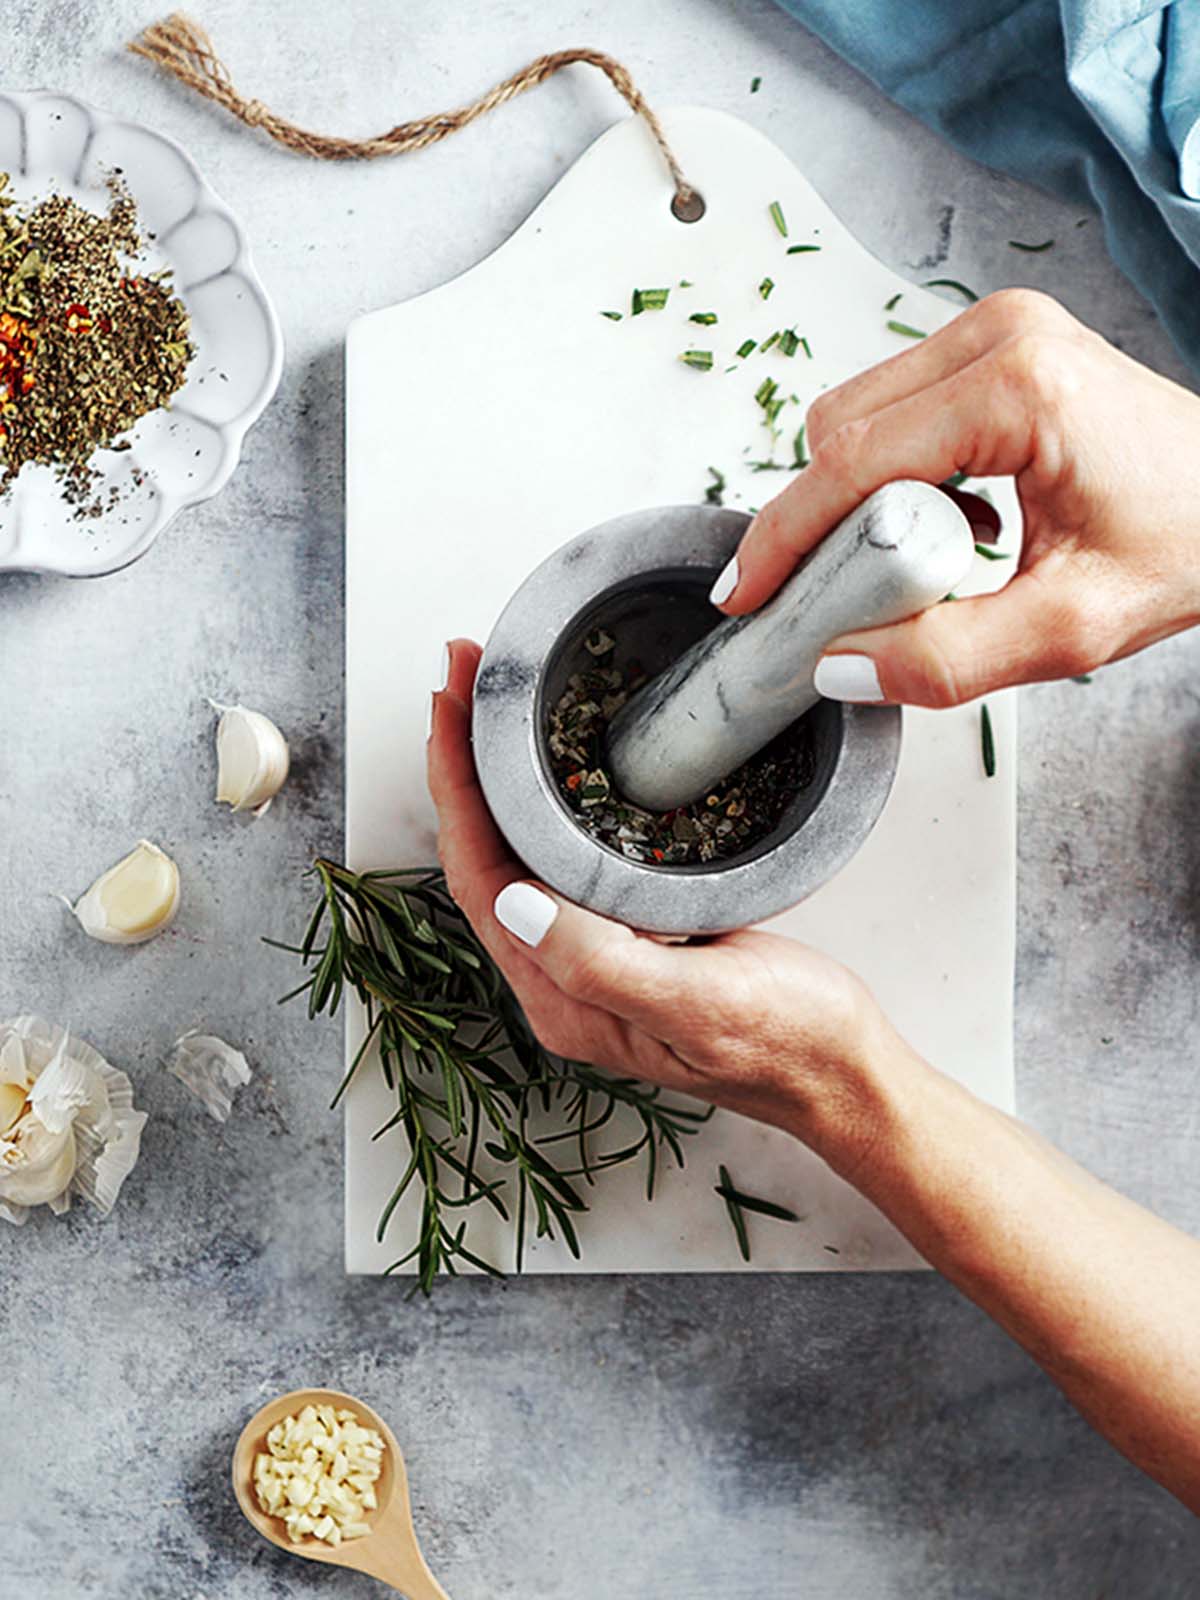 Two hands holding a pestle and mortar grinding herbs.